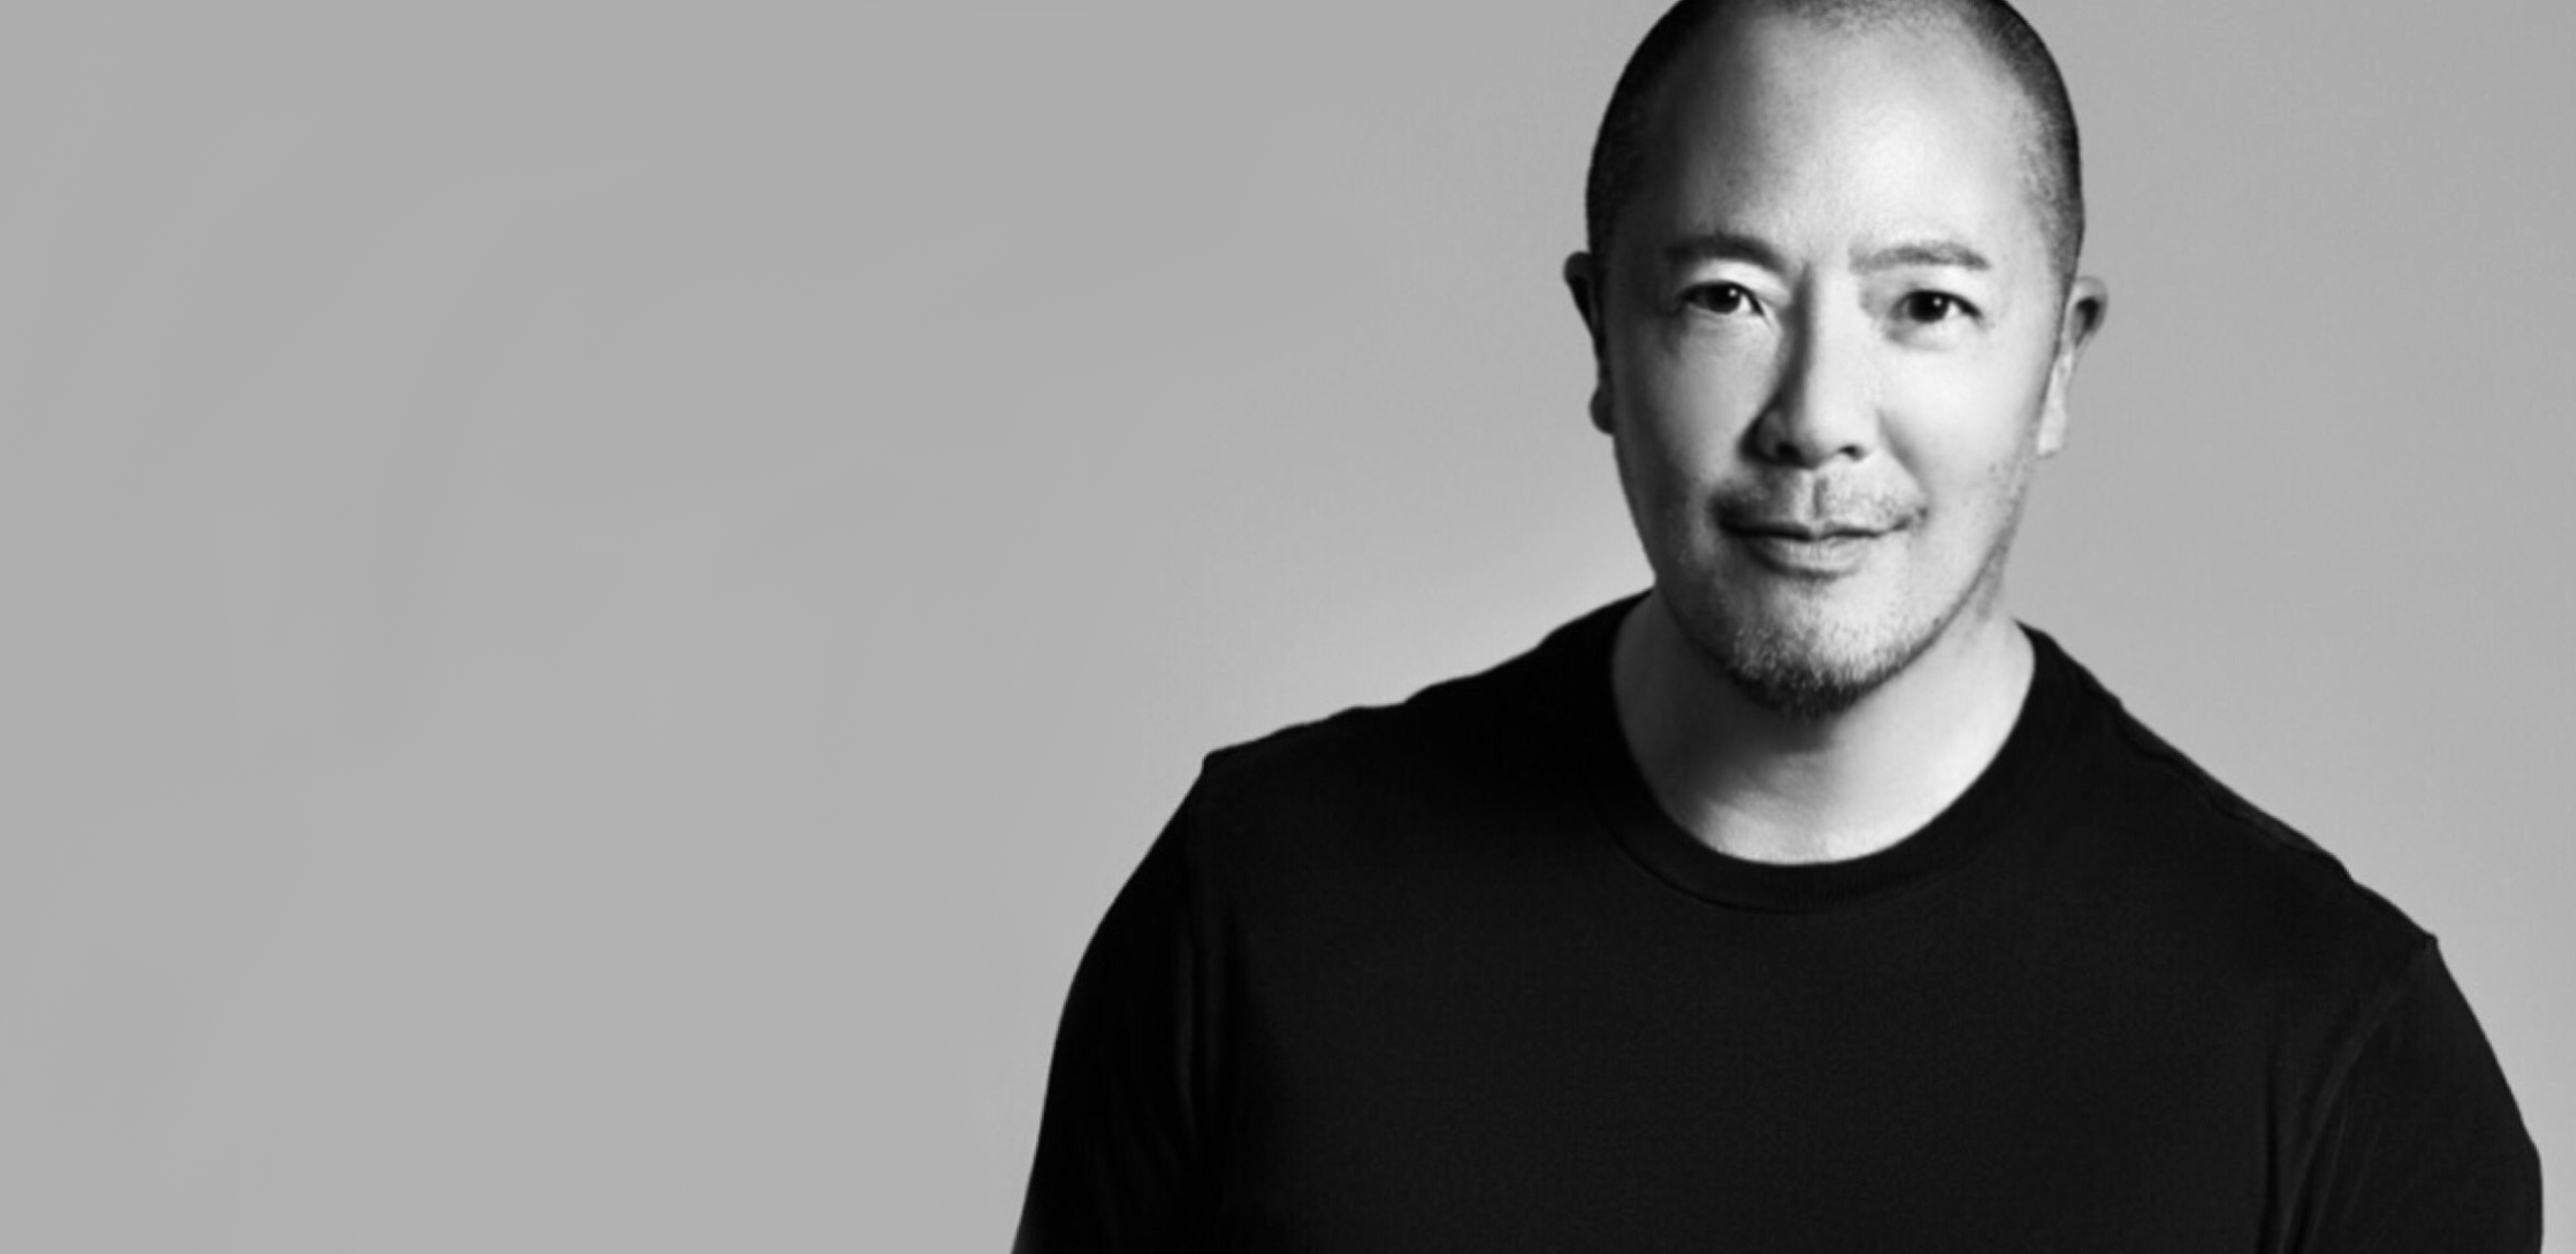 Derek, a forty-something asian-american man with a shaved head, smiles shyly. He is wearing a black tee shirt.